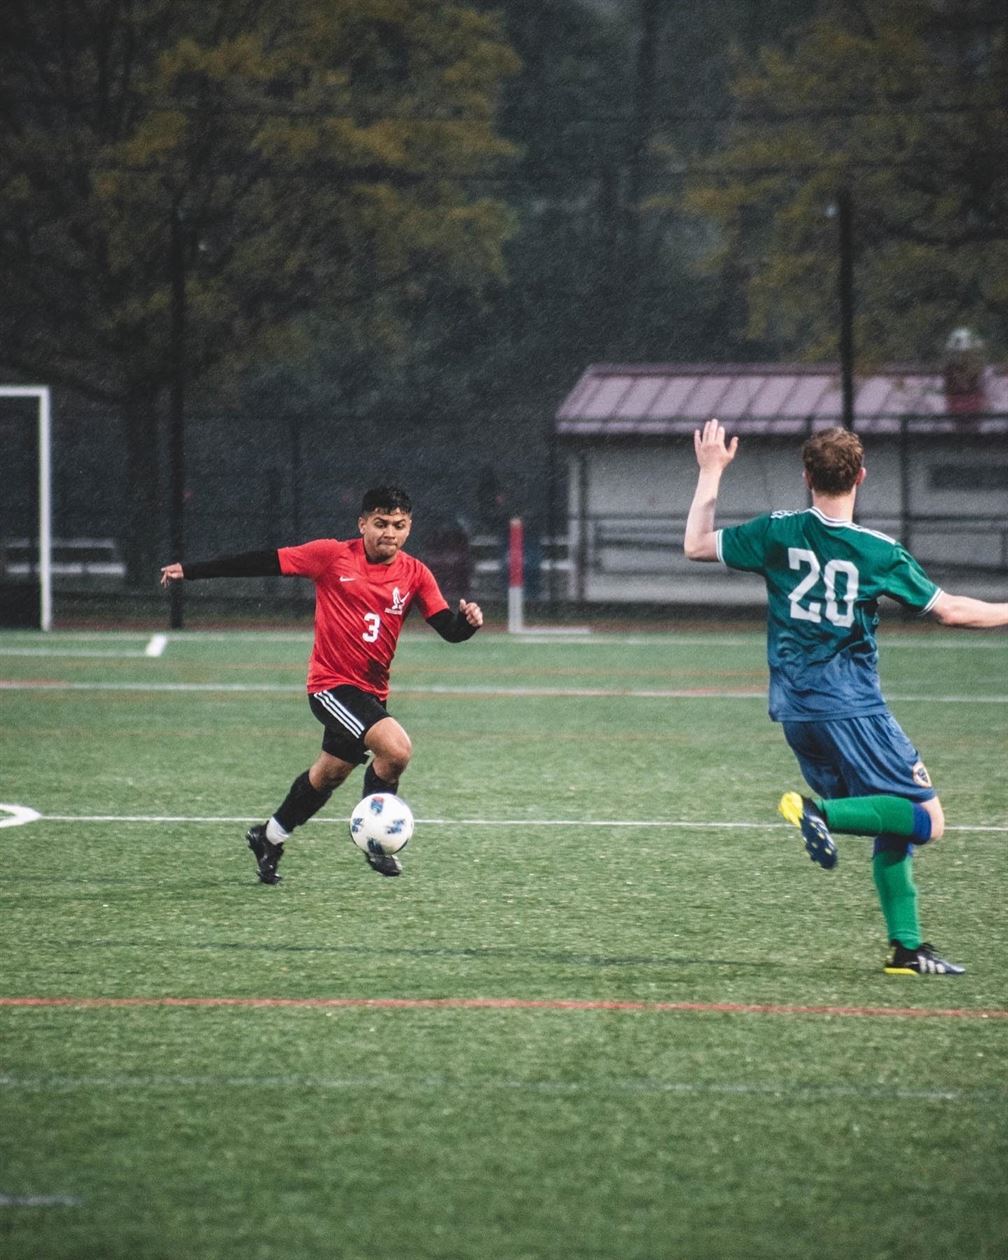 Co-captain and defender Gabe Aguado is loving where the current state of the team is. Photo courtesy of Randy Shaller